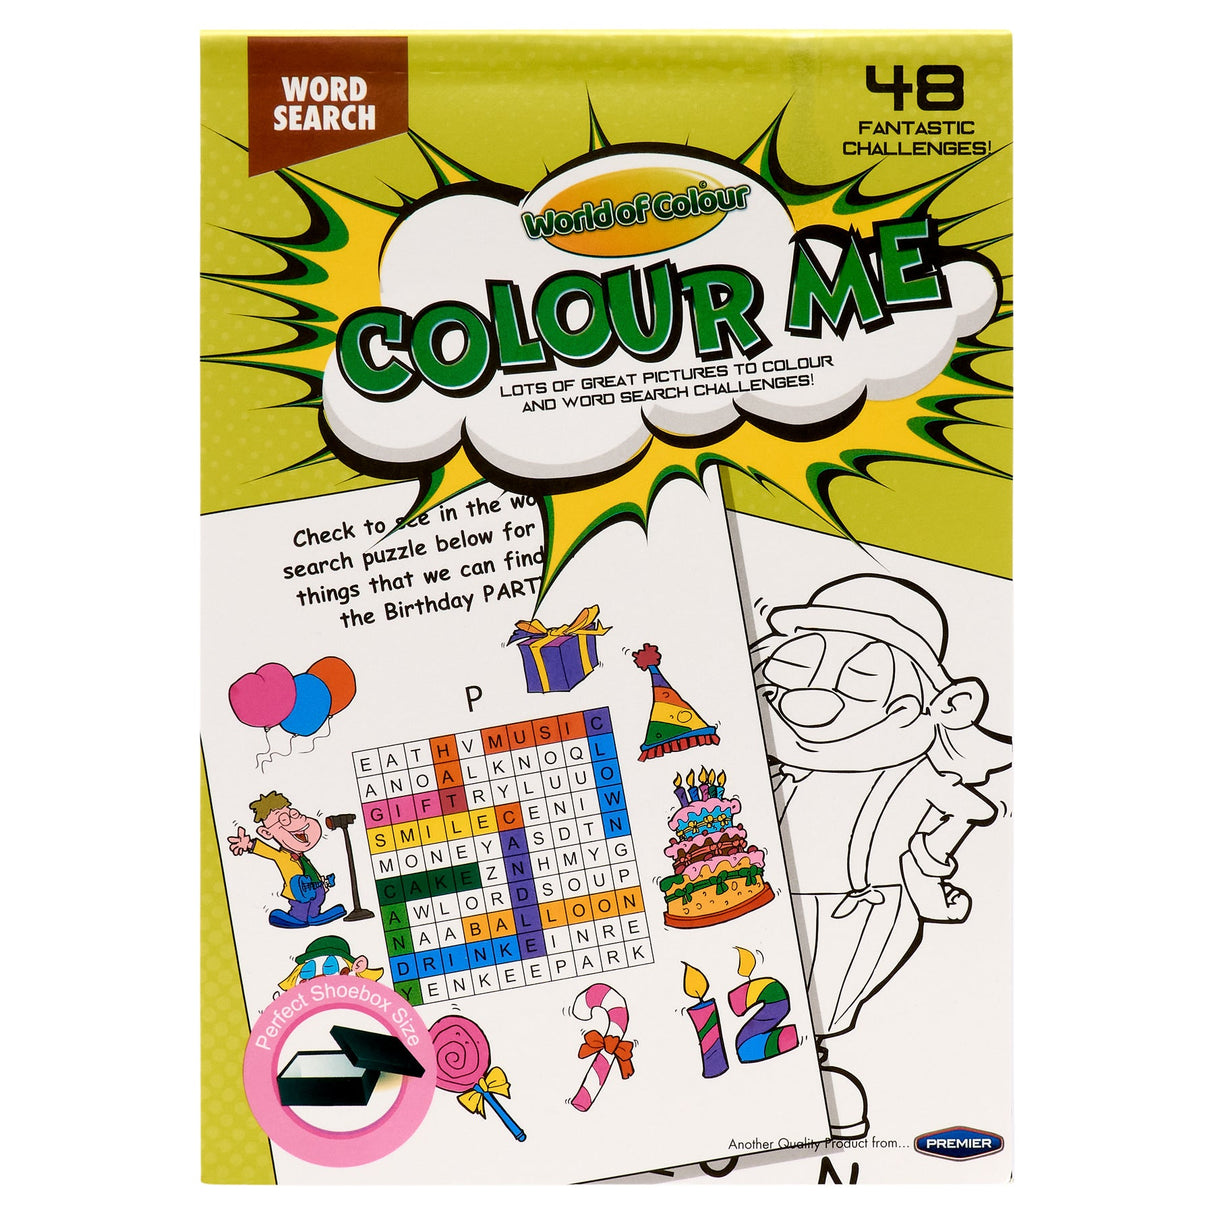 World of Colour A5 Word Search Colouring Book - 48 Pages-Kids Colouring Books-World of Colour|StationeryShop.co.uk